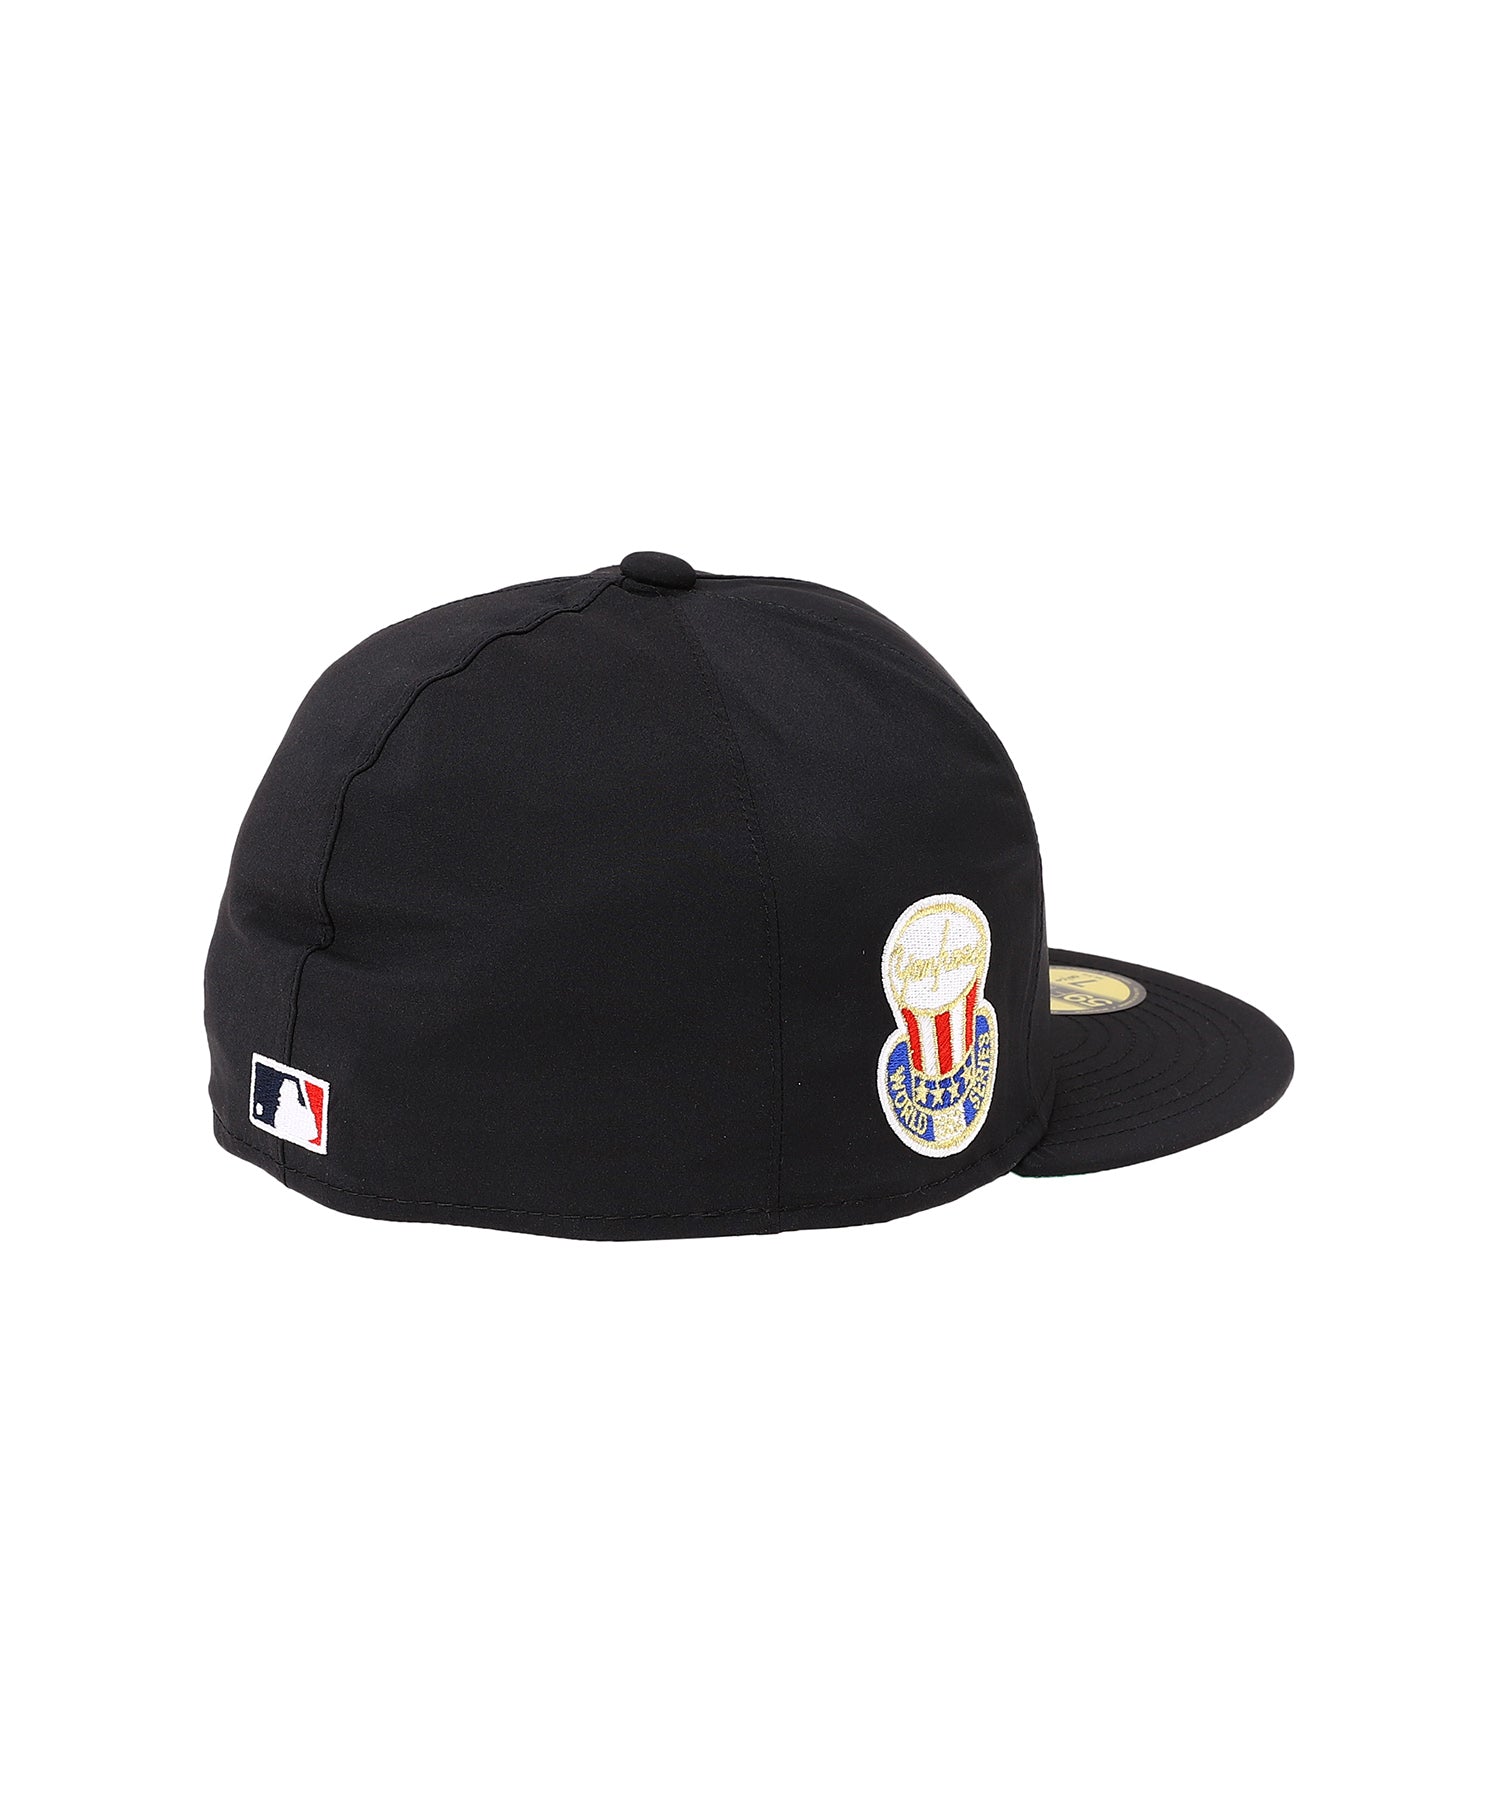 59FIFTY GORE-TEX PACLITE Cooperstown New York Yankees